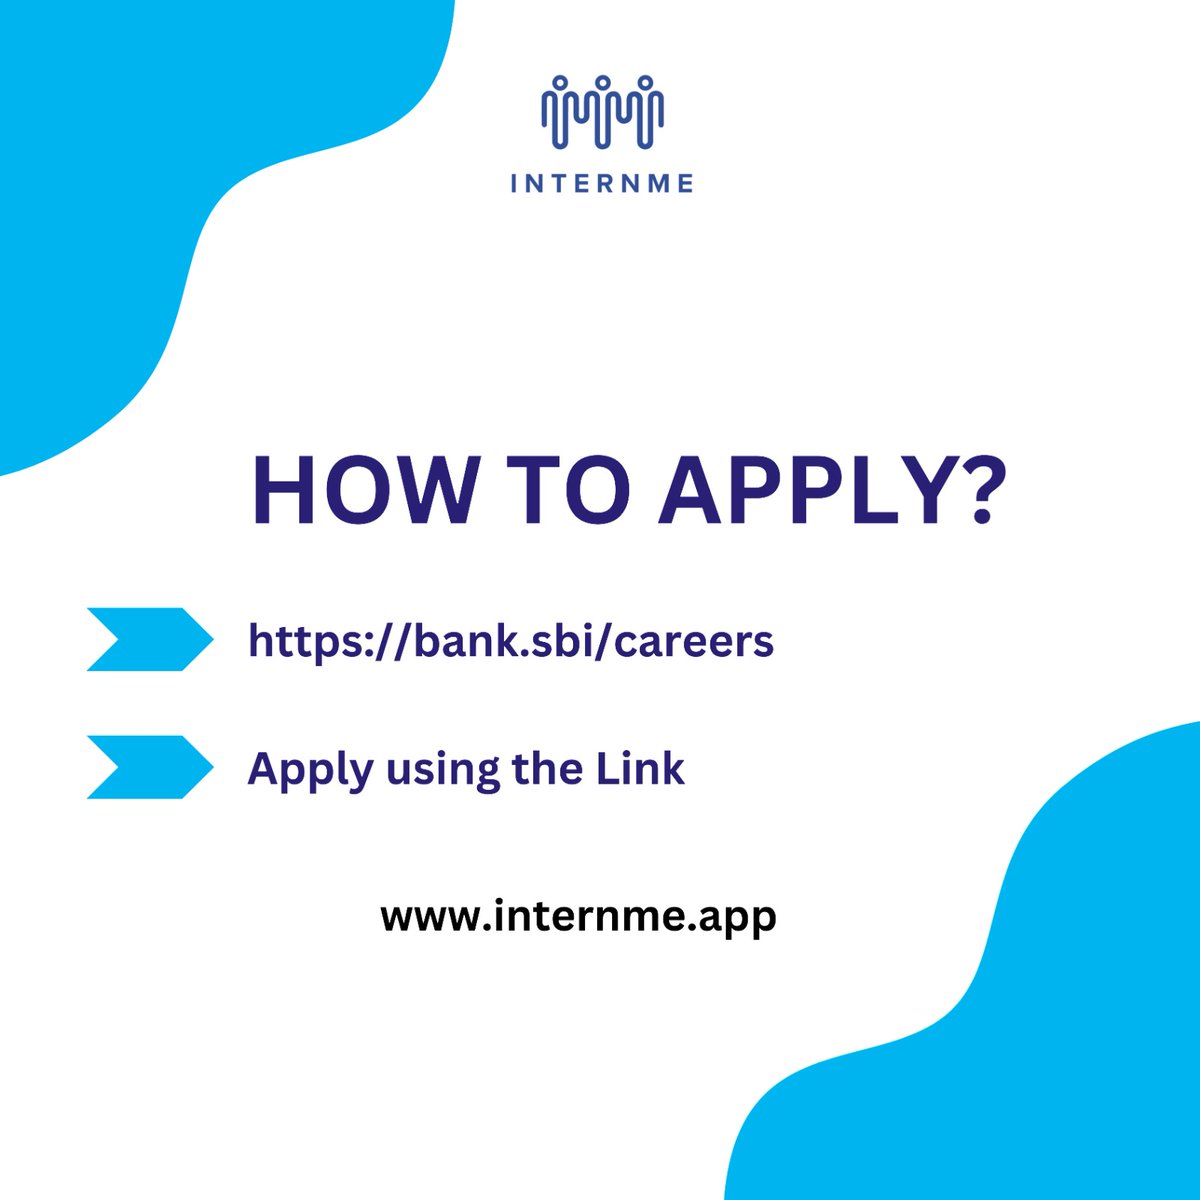 Are you looking to kickstart your career in banking? Look no further! SBI Bank is now hiring apprentices to join our prestigious team!
apply - bank.sbi/careers
#SBIHiring #BankingCareer #Apprenticeship #JumpstartYourCareer #BankJobs